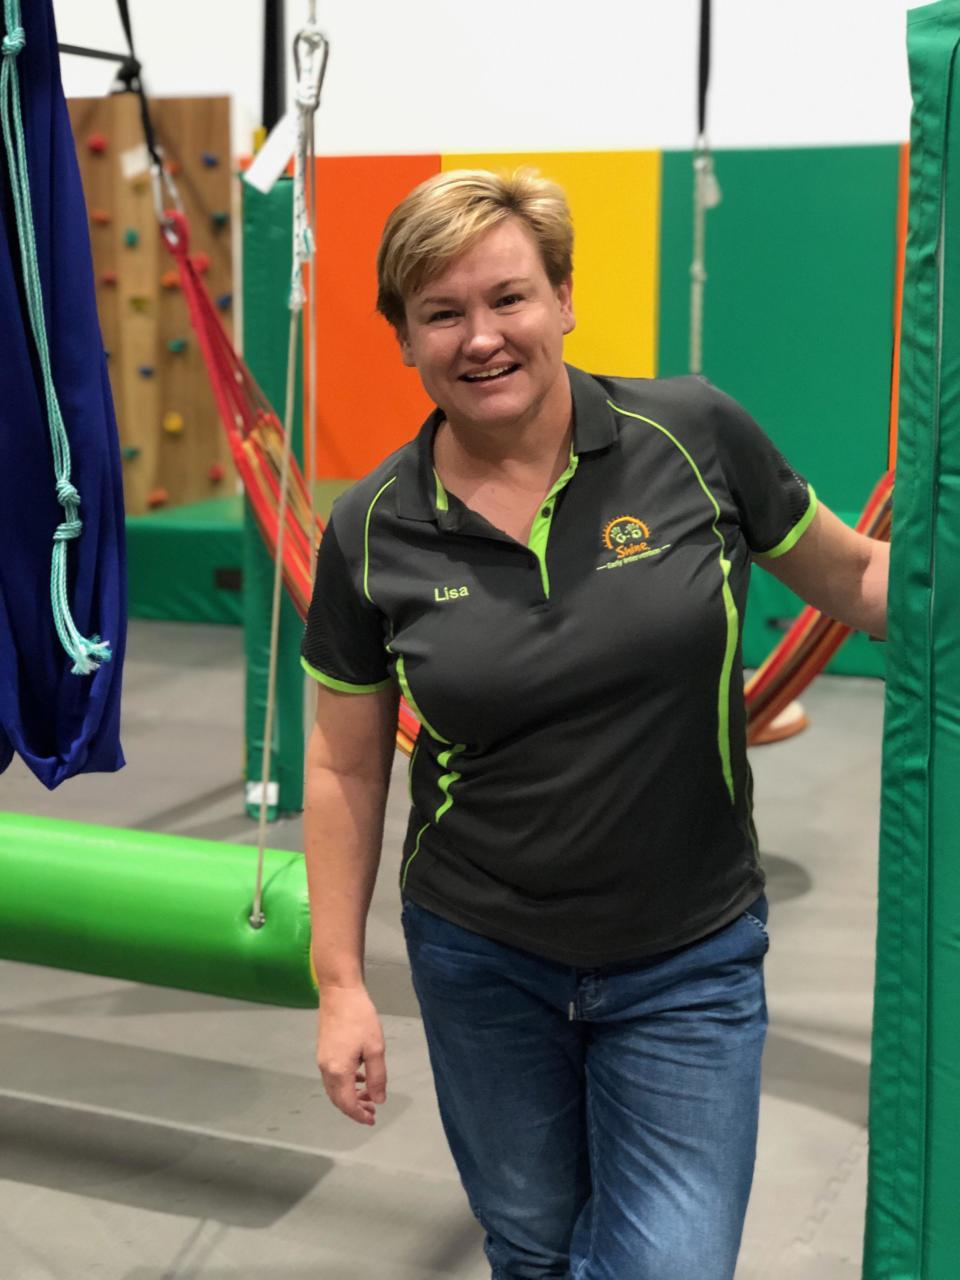 Owner of The Shine Shed, a play centre for people with disabilities, in Campbelltown, NSW, Lisa Fruhstuck. 